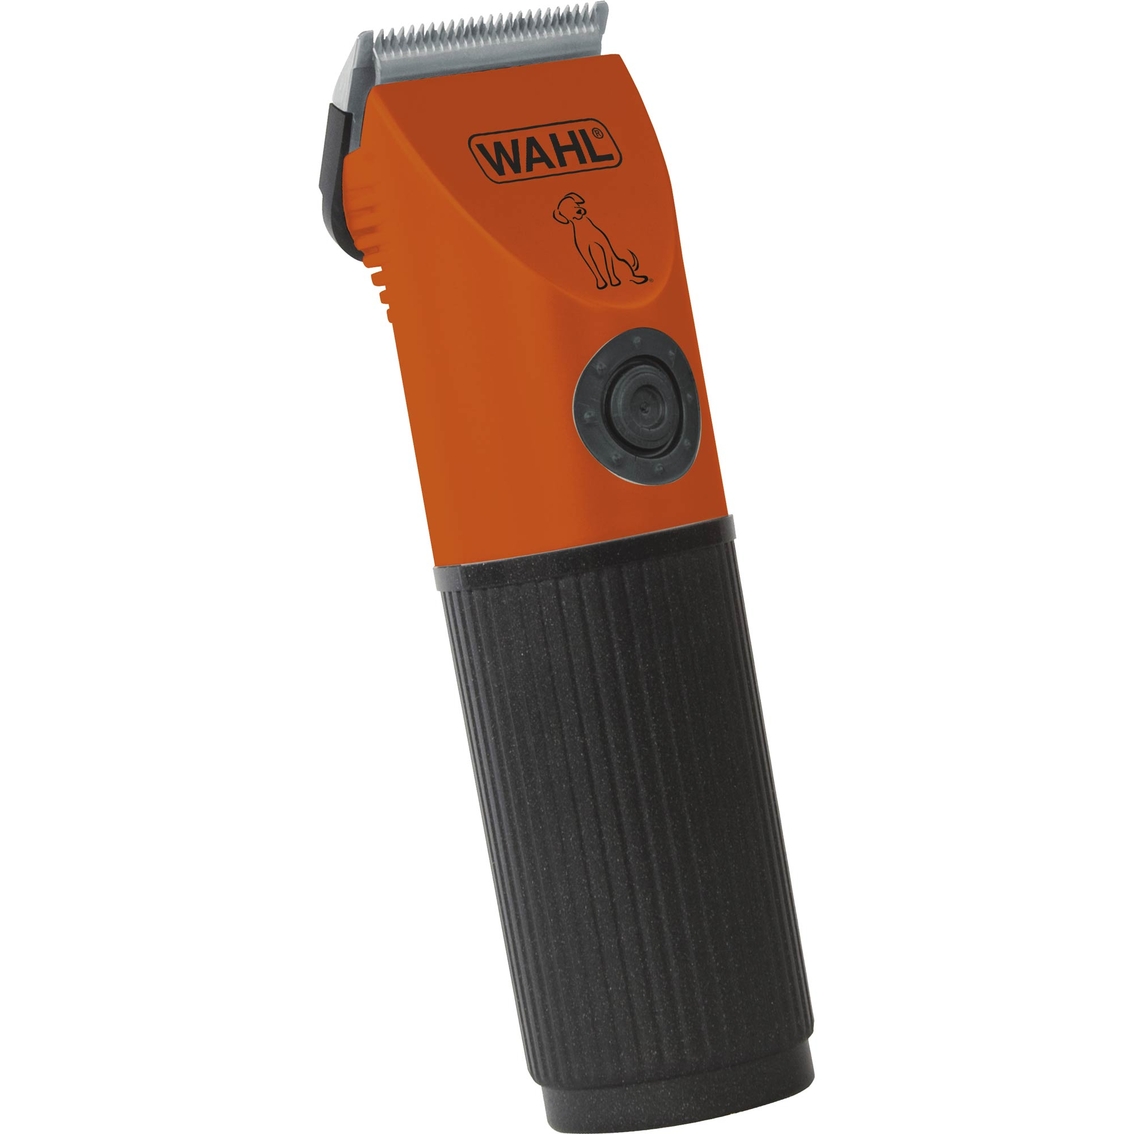 Wahl Touch Up Trimmer - Image 2 of 3